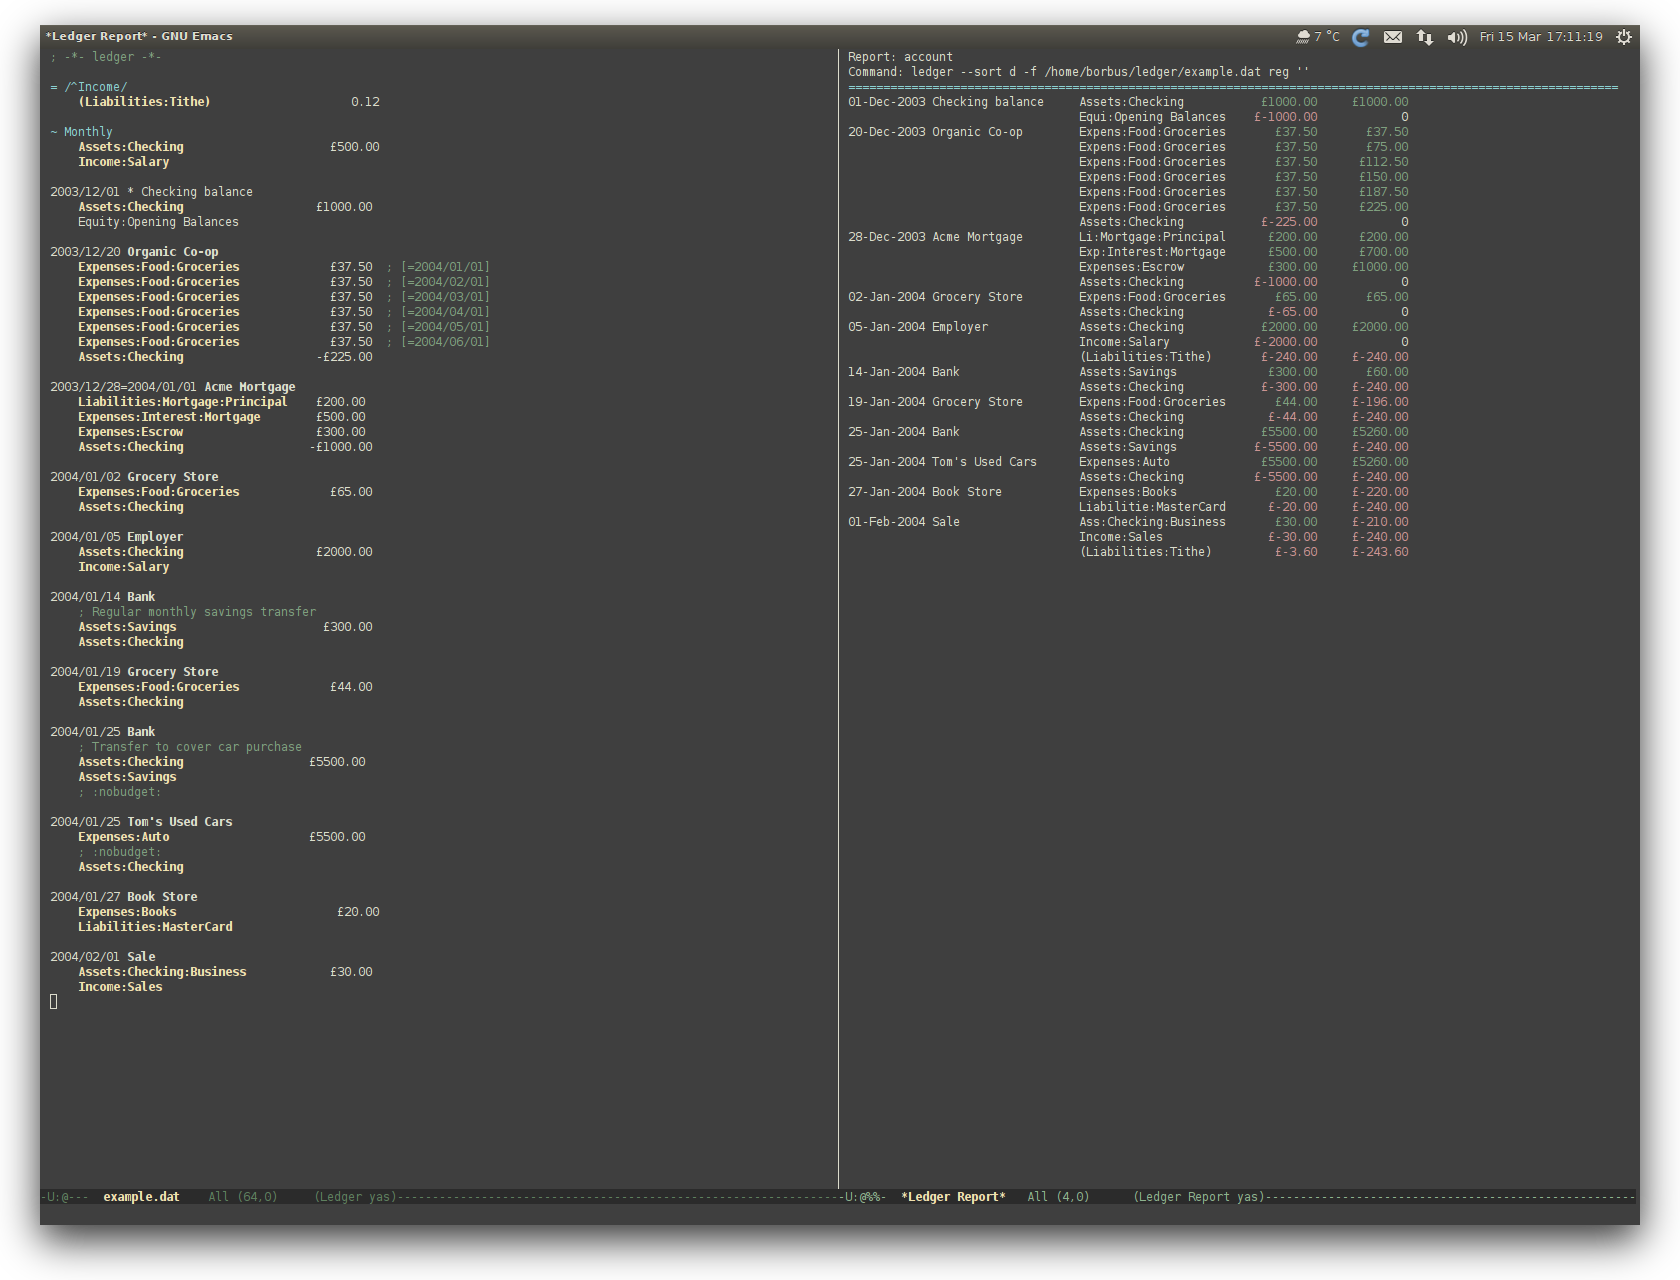 /TakeV/spacemacs/media/commit/61062f5b1415a9c09150acd6f342935aa7485e56/contrib/finance/img/ledger.png